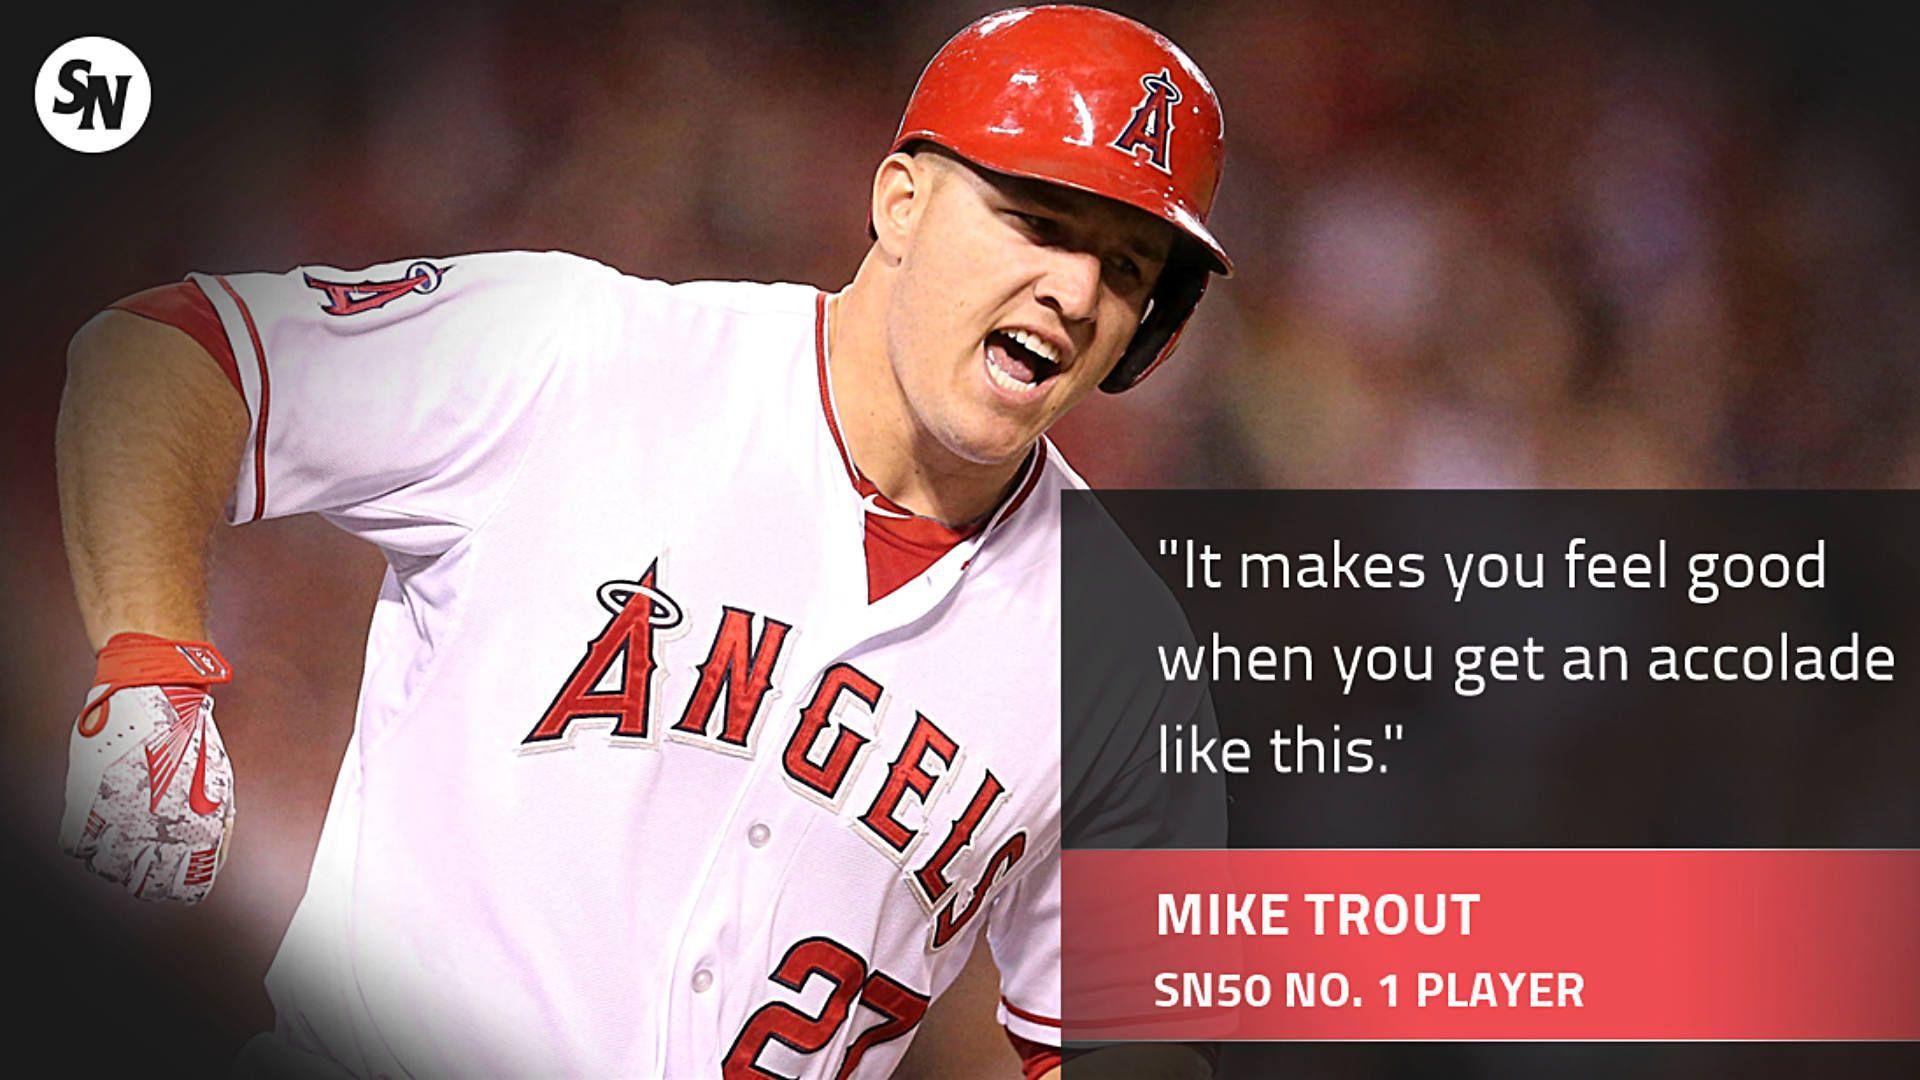 Mike Trout edges Bryce Harper as MLB's best player in SN50 poll